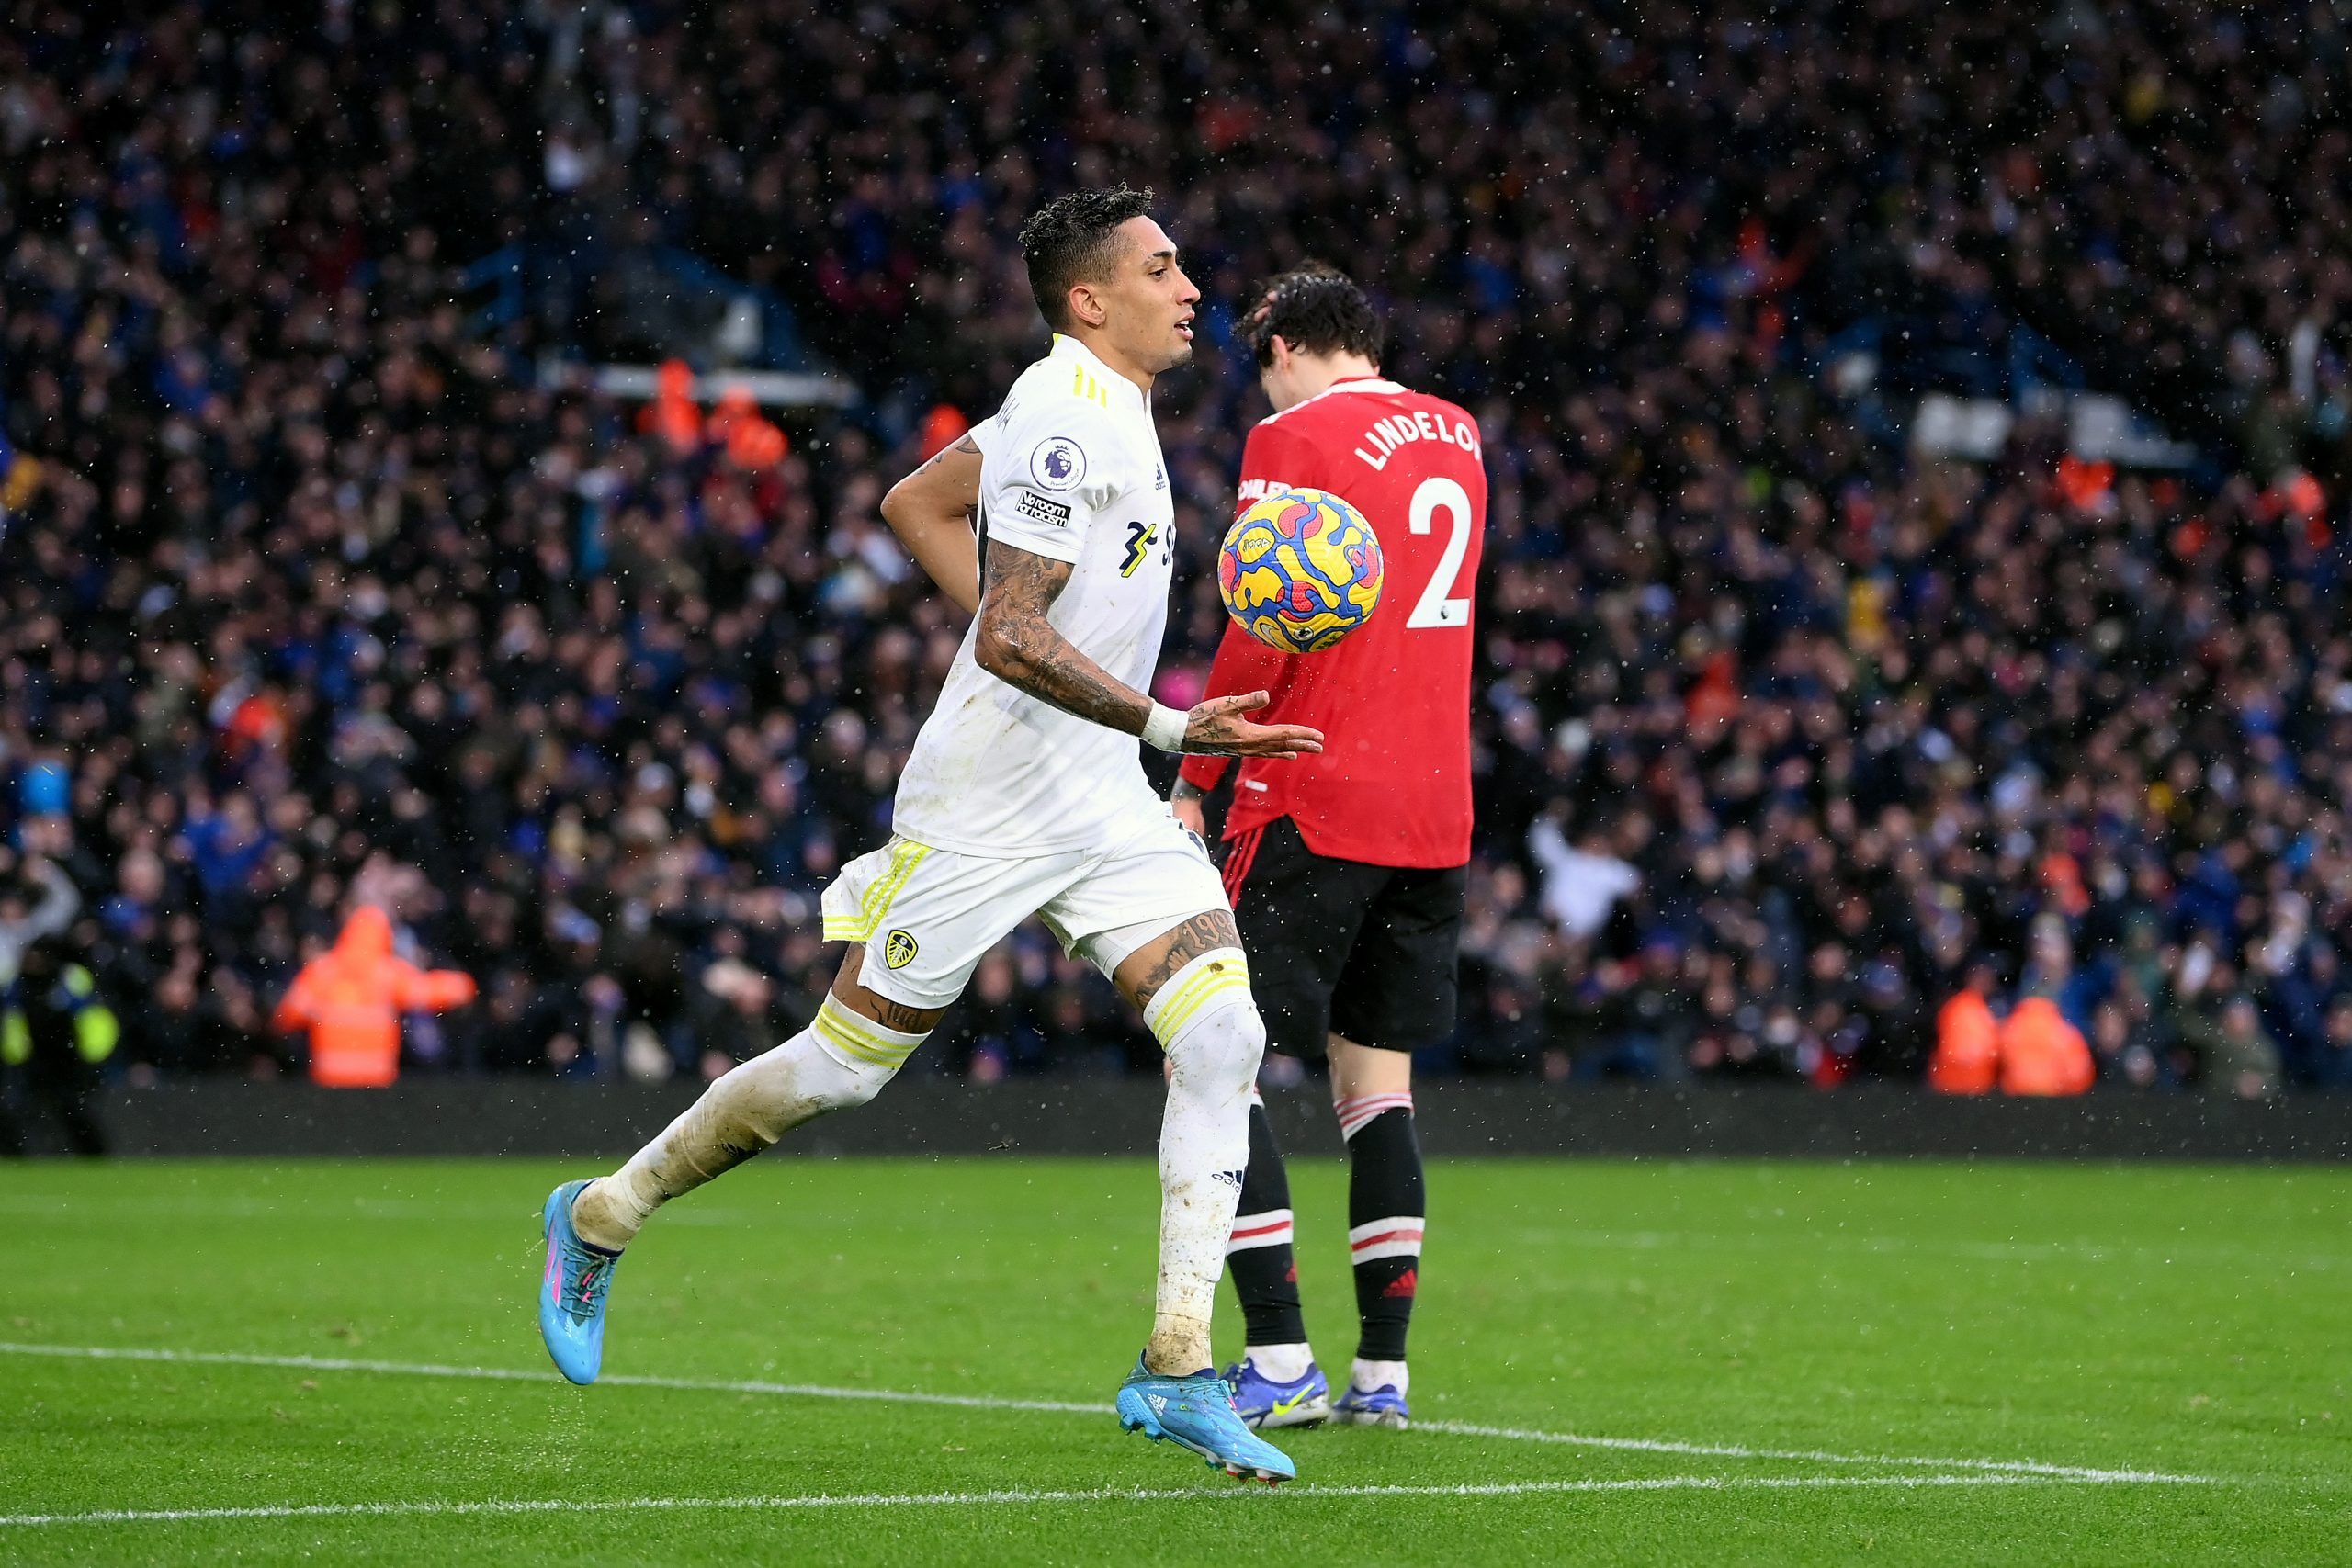 LEEDS, ENGLAND - FEBRUARY 20: Raphinha of Leeds United celebrates after scoring their side's second goal during the Premier League match between Leeds United and Manchester United at Elland Road on February 20, 2022 in Leeds, England. (Photo by Laurence Griffiths/Getty Images)The 4th Official uses images provided by the following image agency: Getty Images (https://www.gettyimages.de/) Imago Images (https://www.imago-images.de/)